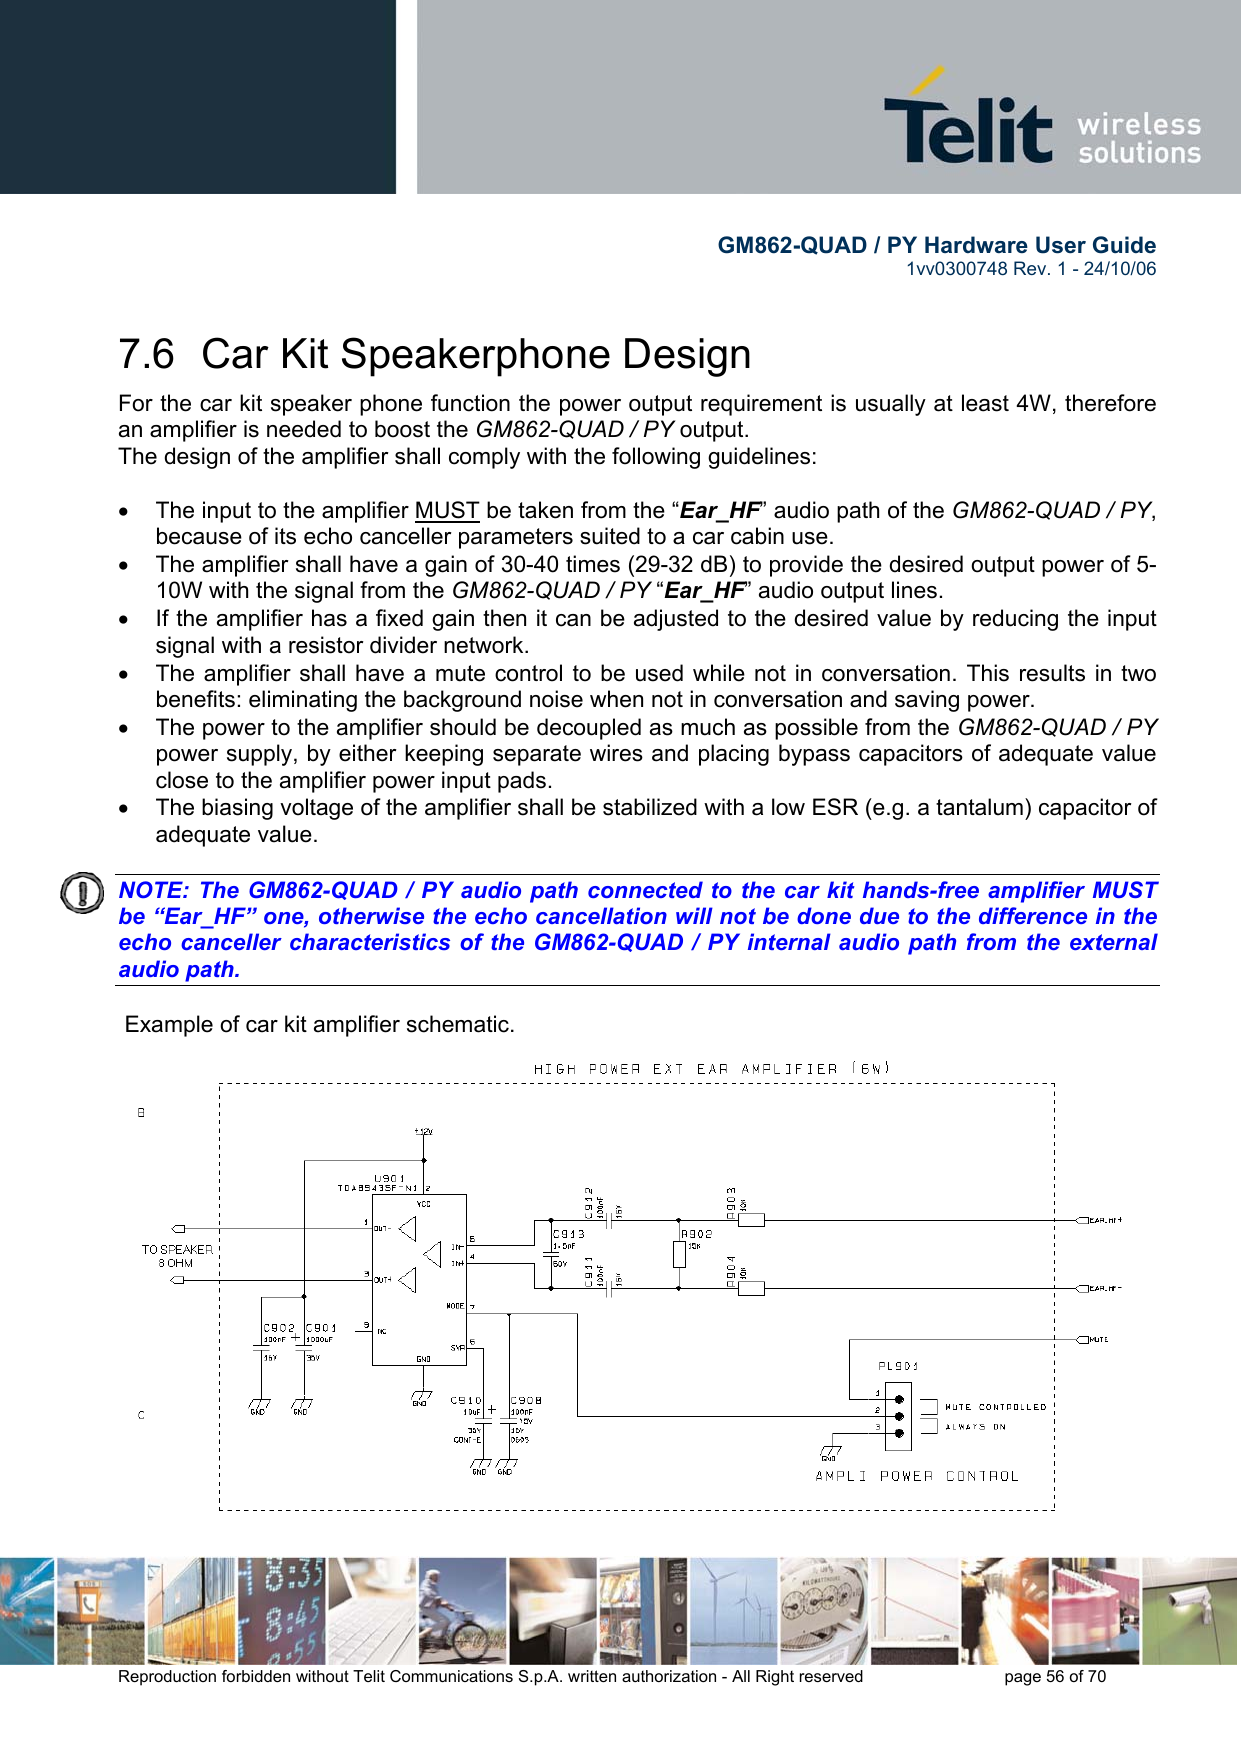        GM862-QUAD / PY Hardware User Guide   1vv0300748 Rev. 1 - 24/10/06    Reproduction forbidden without Telit Communications S.p.A. written authorization - All Right reserved    page 56 of 70  7.6  Car Kit Speakerphone Design For the car kit speaker phone function the power output requirement is usually at least 4W, therefore an amplifier is needed to boost the GM862-QUAD / PY output. The design of the amplifier shall comply with the following guidelines:  •  The input to the amplifier MUST be taken from the “Ear_HF” audio path of the GM862-QUAD / PY, because of its echo canceller parameters suited to a car cabin use. •  The amplifier shall have a gain of 30-40 times (29-32 dB) to provide the desired output power of 5-10W with the signal from the GM862-QUAD / PY “Ear_HF” audio output lines. •  If the amplifier has a fixed gain then it can be adjusted to the desired value by reducing the input signal with a resistor divider network. •  The amplifier shall have a mute control to be used while not in conversation. This results in two benefits: eliminating the background noise when not in conversation and saving power. •  The power to the amplifier should be decoupled as much as possible from the GM862-QUAD / PY power supply, by either keeping separate wires and placing bypass capacitors of adequate value close to the amplifier power input pads. •  The biasing voltage of the amplifier shall be stabilized with a low ESR (e.g. a tantalum) capacitor of adequate value.   NOTE: The GM862-QUAD / PY audio path connected to the car kit hands-free amplifier MUST be “Ear_HF” one, otherwise the echo cancellation will not be done due to the difference in the echo canceller characteristics of the GM862-QUAD / PY internal audio path from the external audio path.     Example of car kit amplifier schematic. 